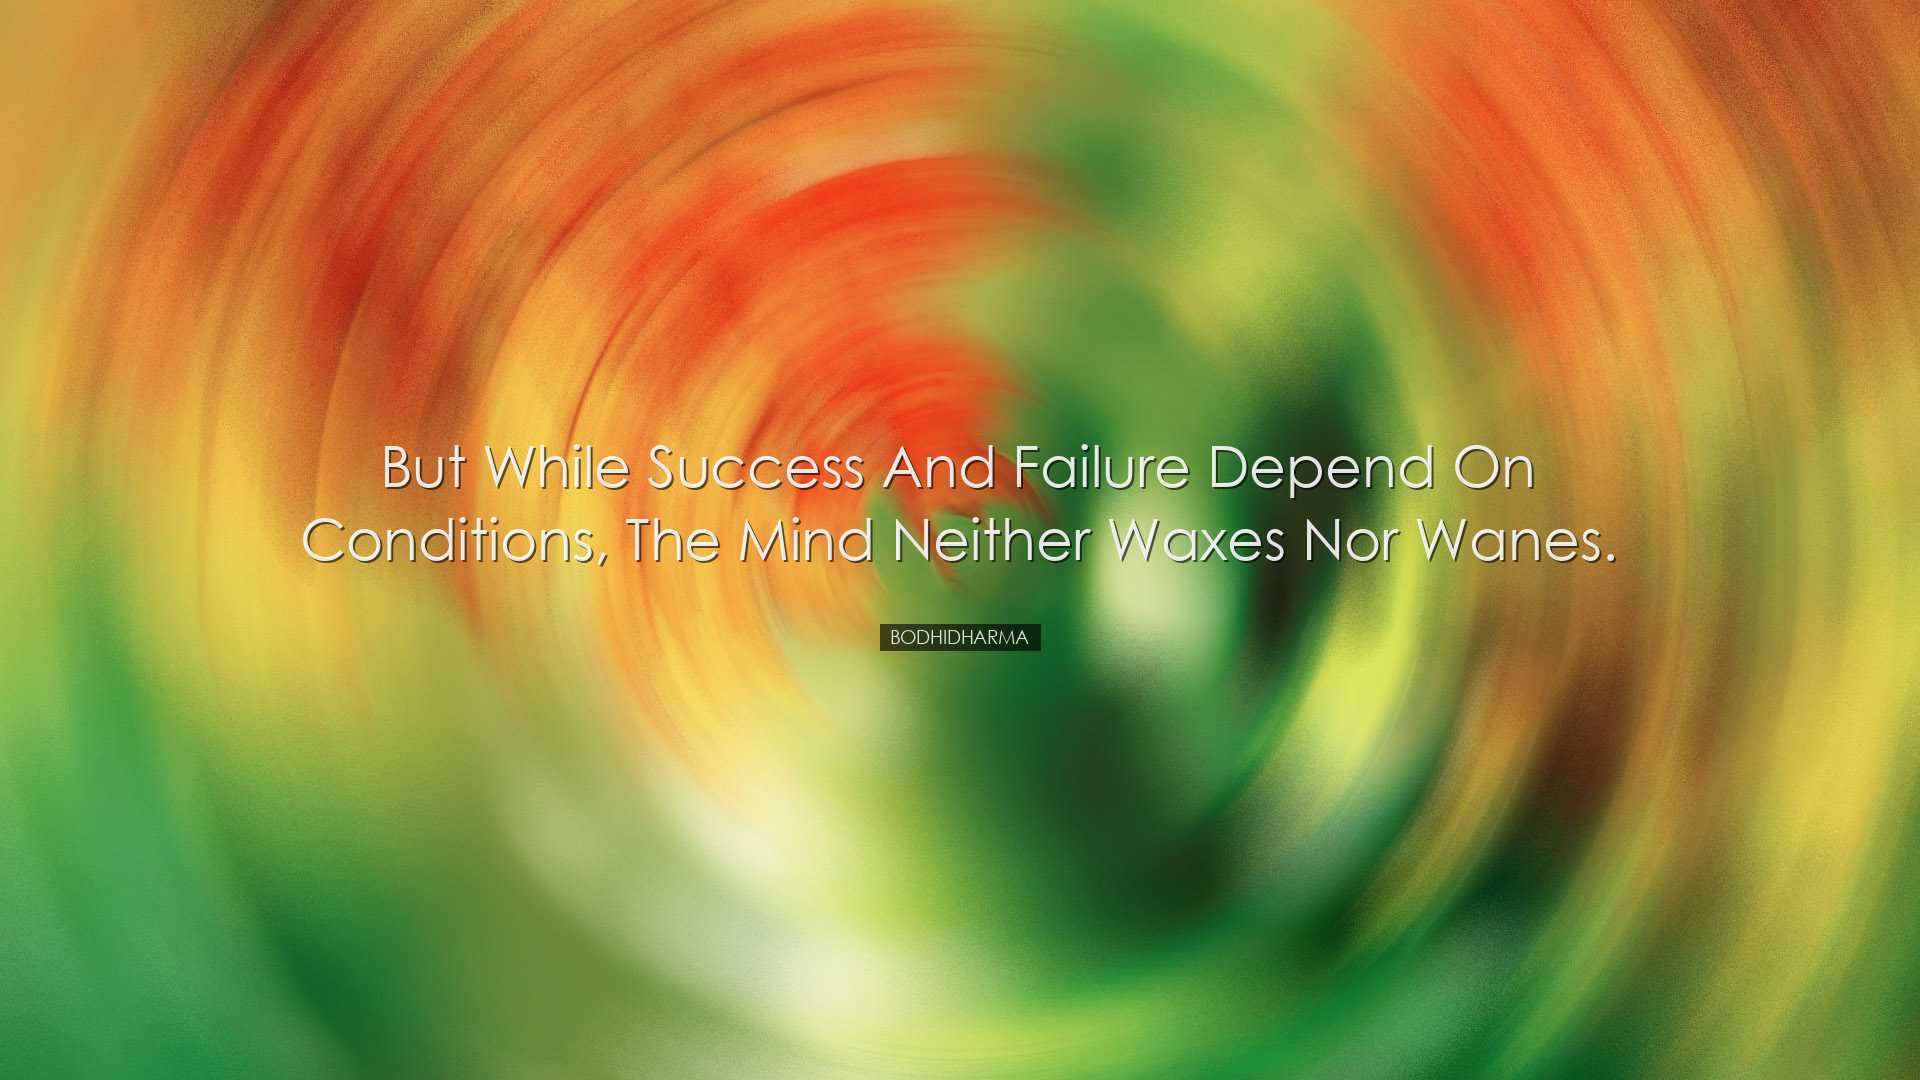 But while success and failure depend on conditions, the mind neith